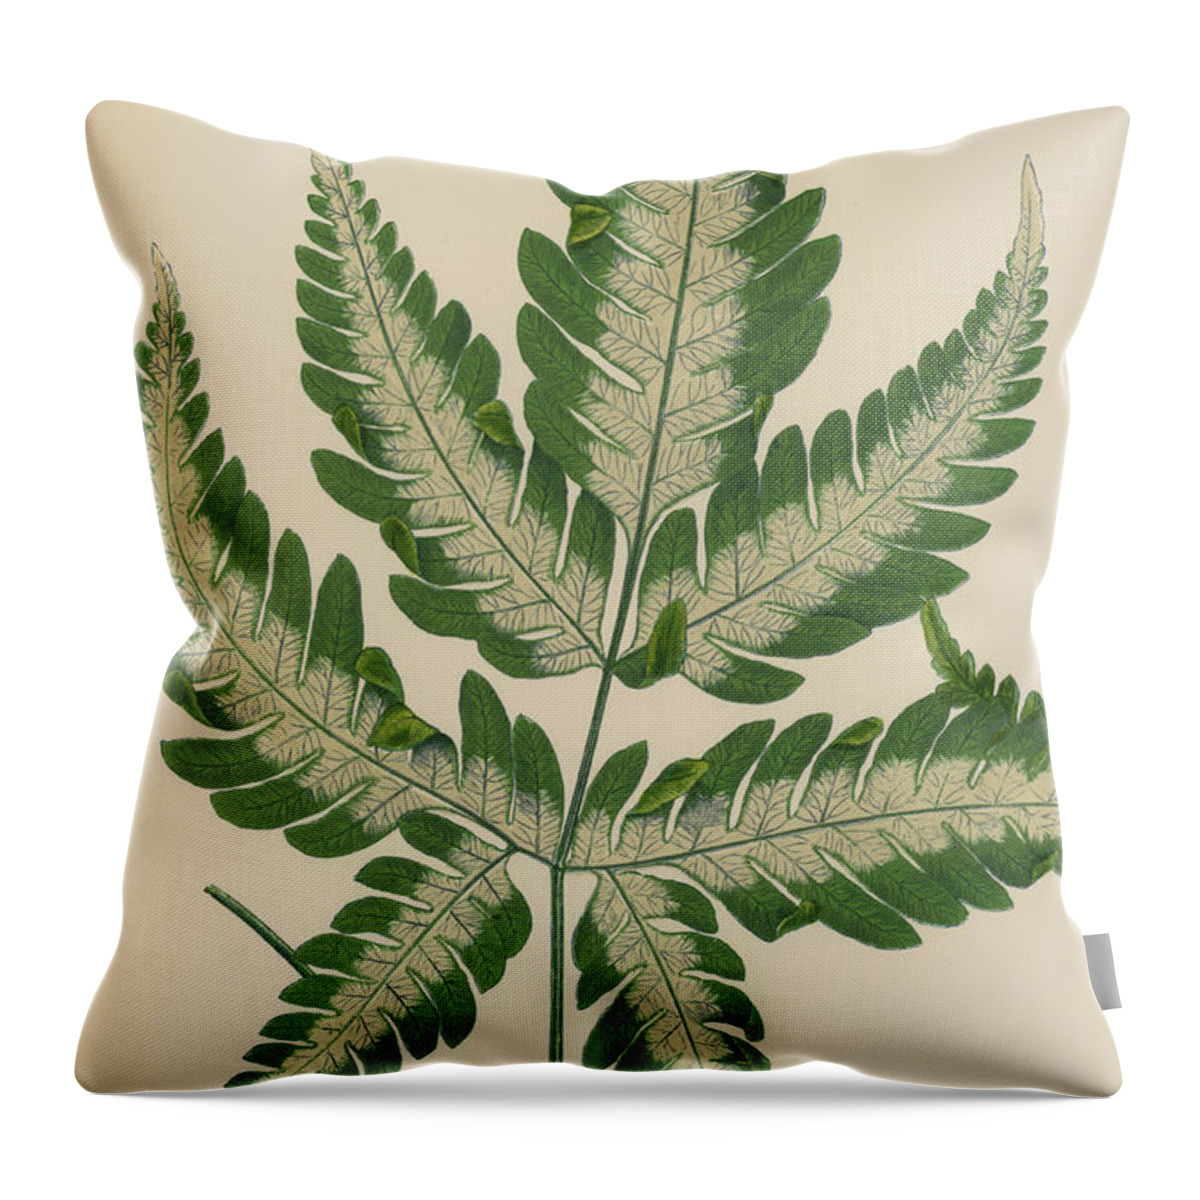 Fern Throw Pillow featuring the painting Brake Fern by English School